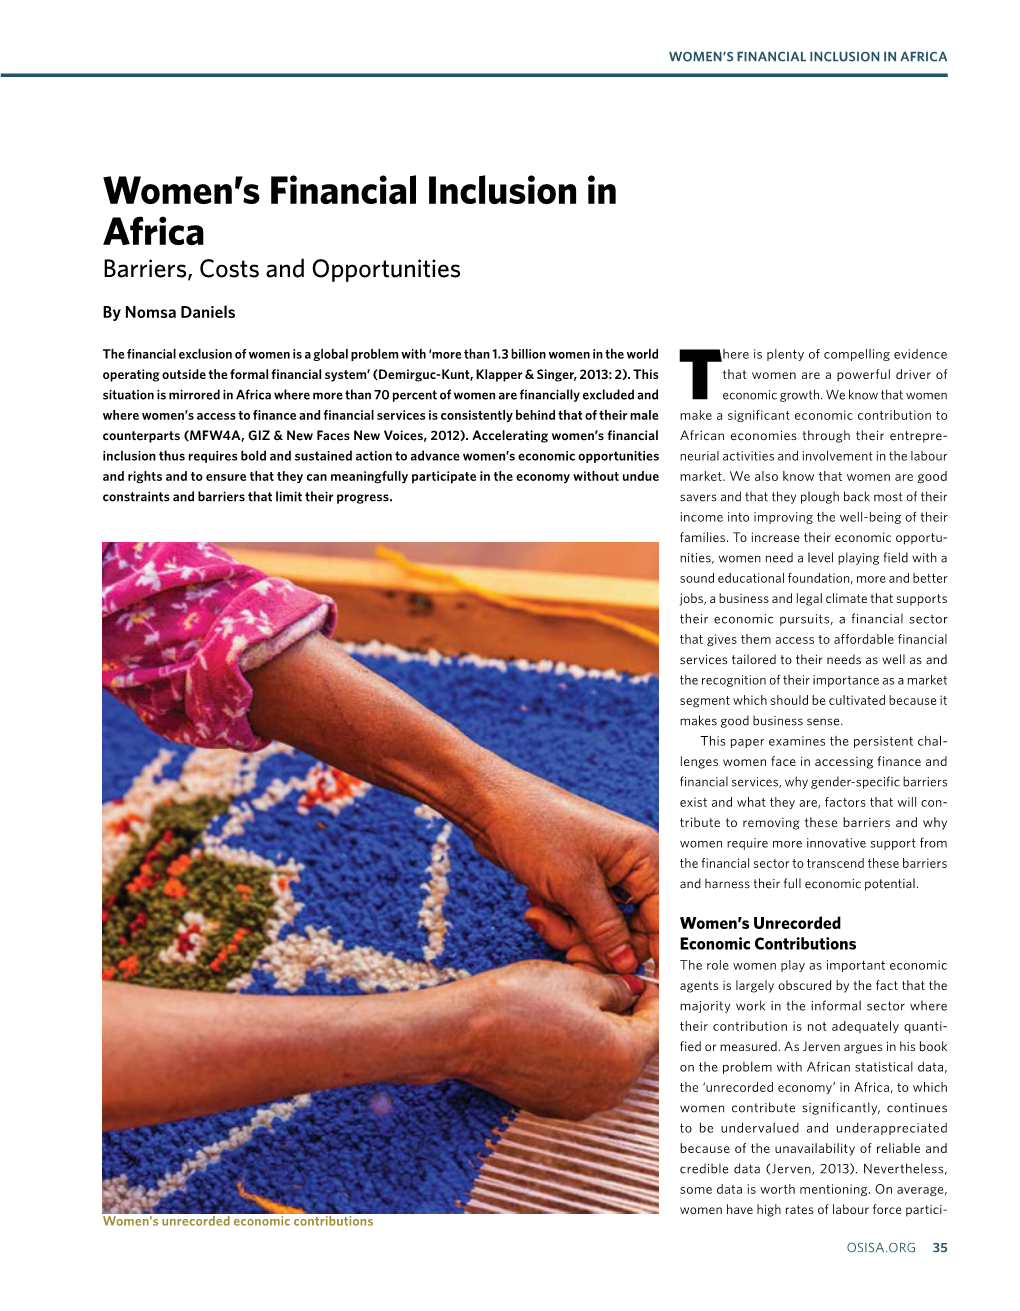 Women's Financial Inclusion in Africa